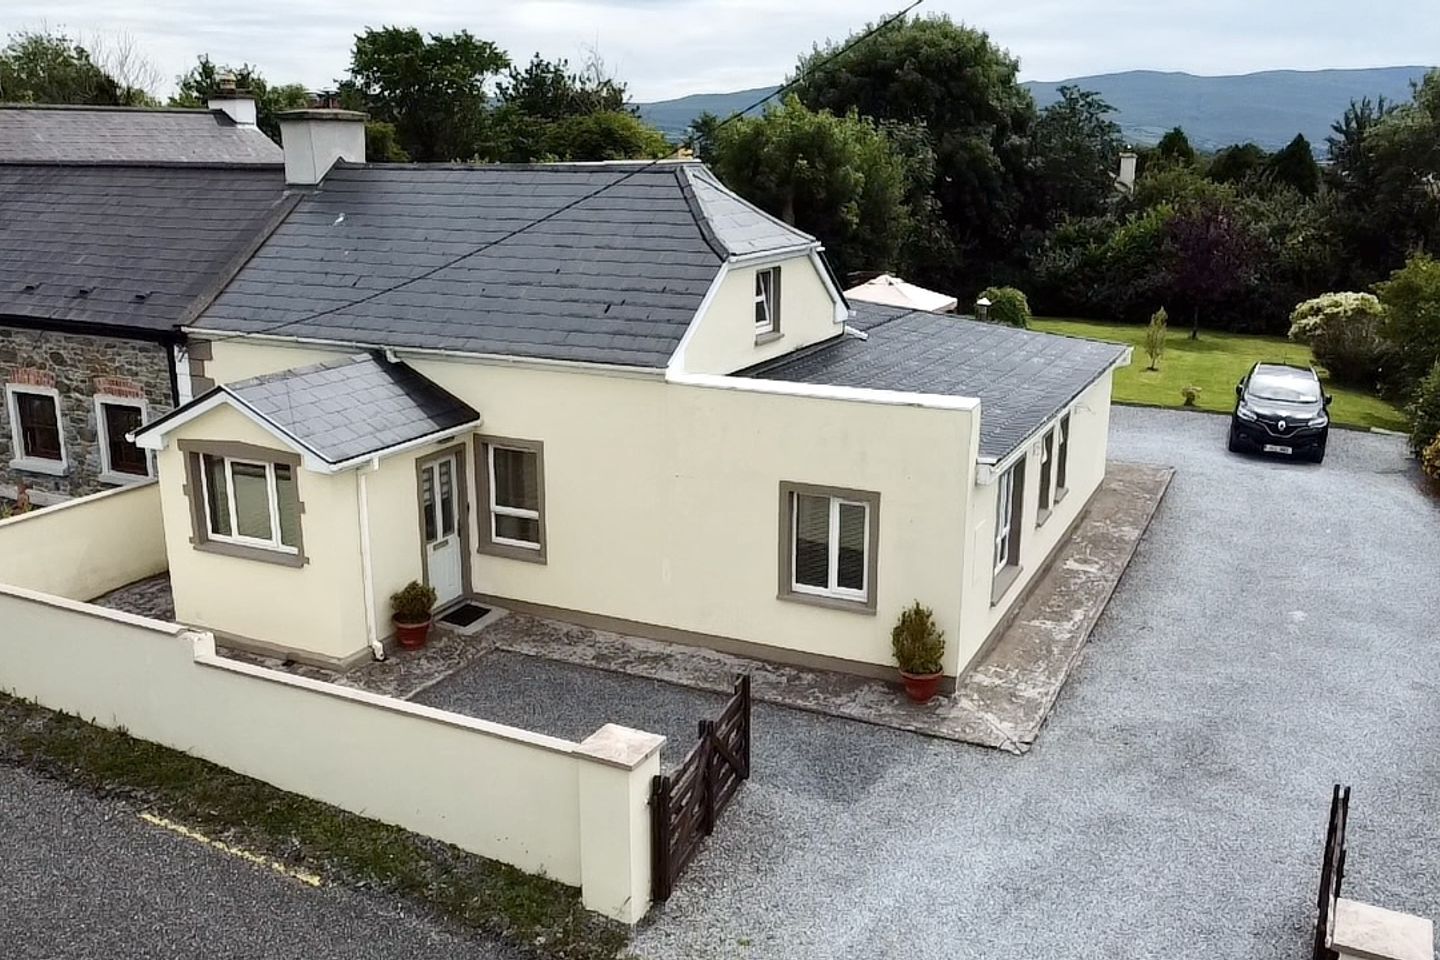 The Horseshoe Cottage, Forge Cross, Tralee, Co. Kerry